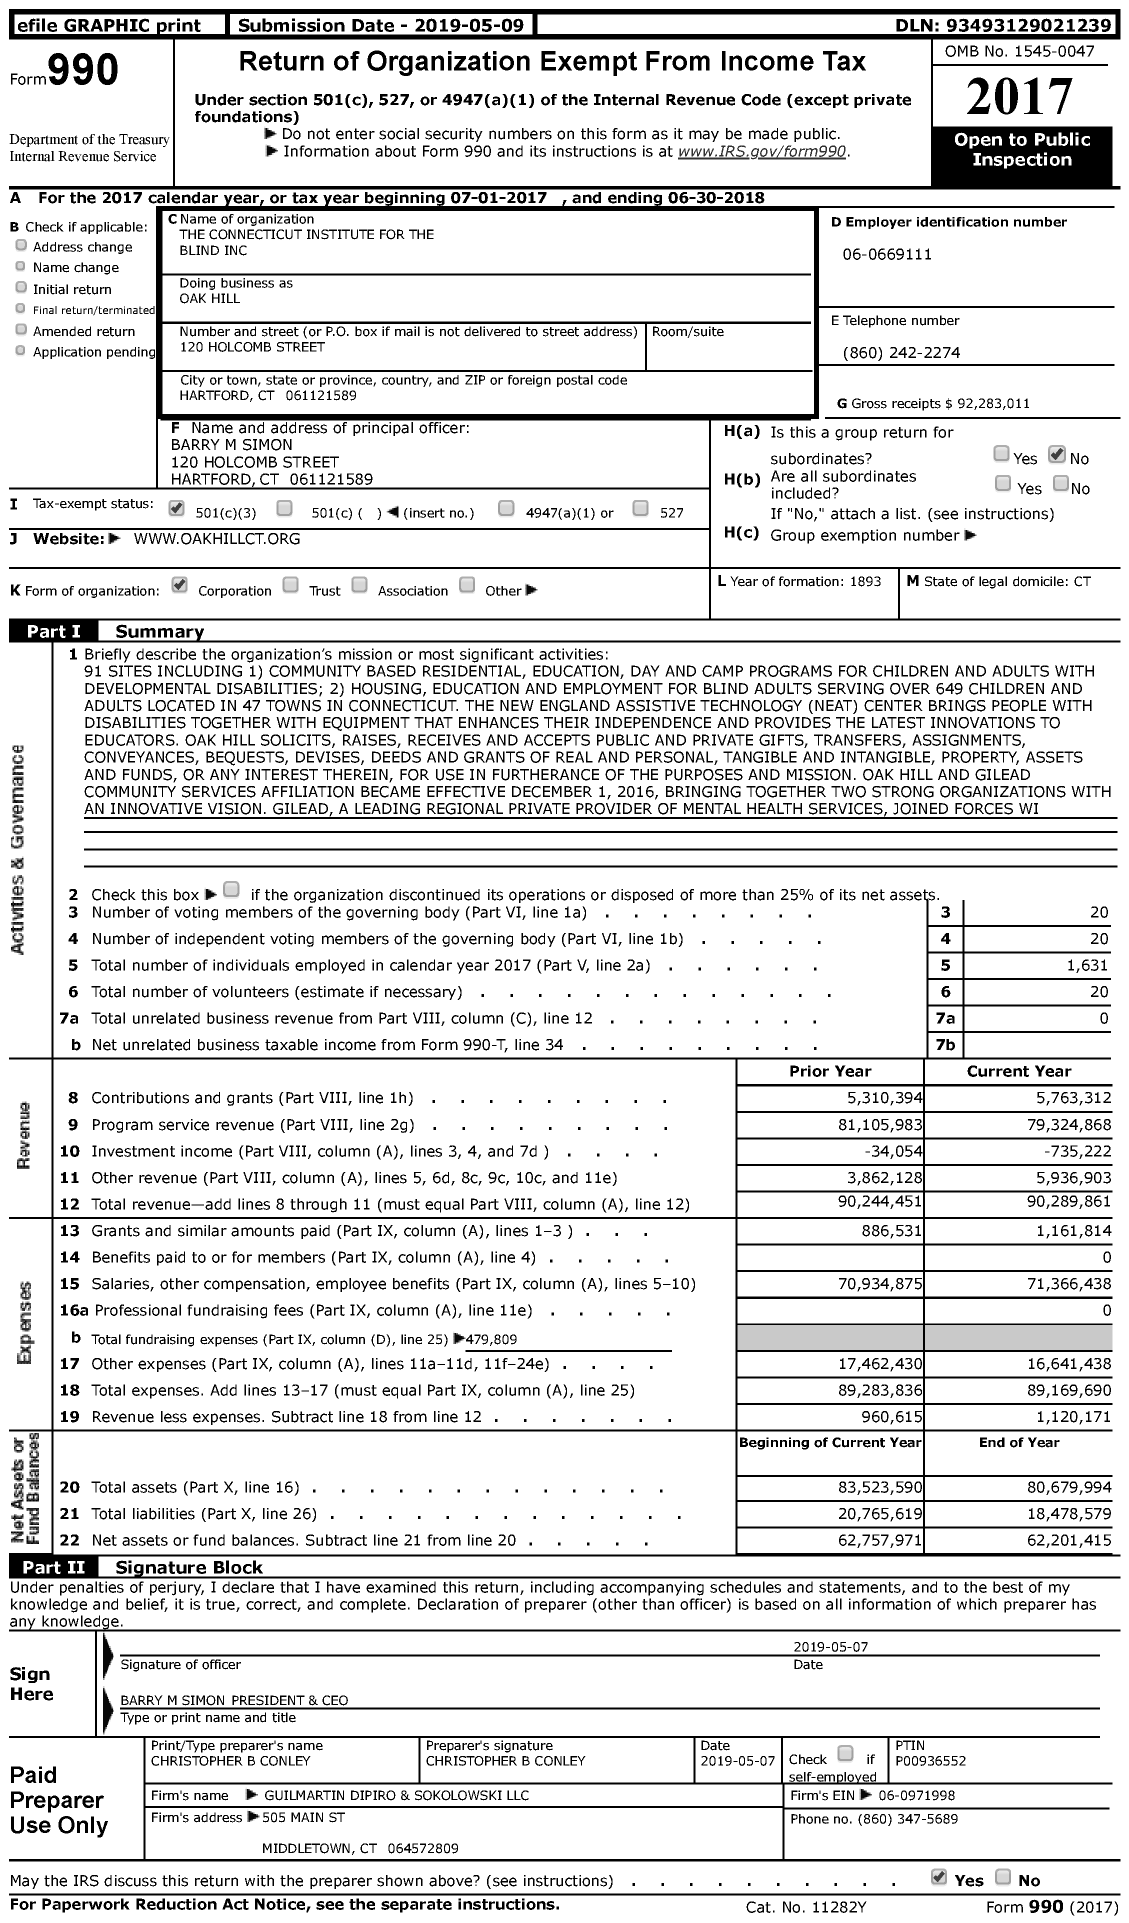 Image of first page of 2017 Form 990 for Oak Hill / The Connecticut Institute for the Blind Inc